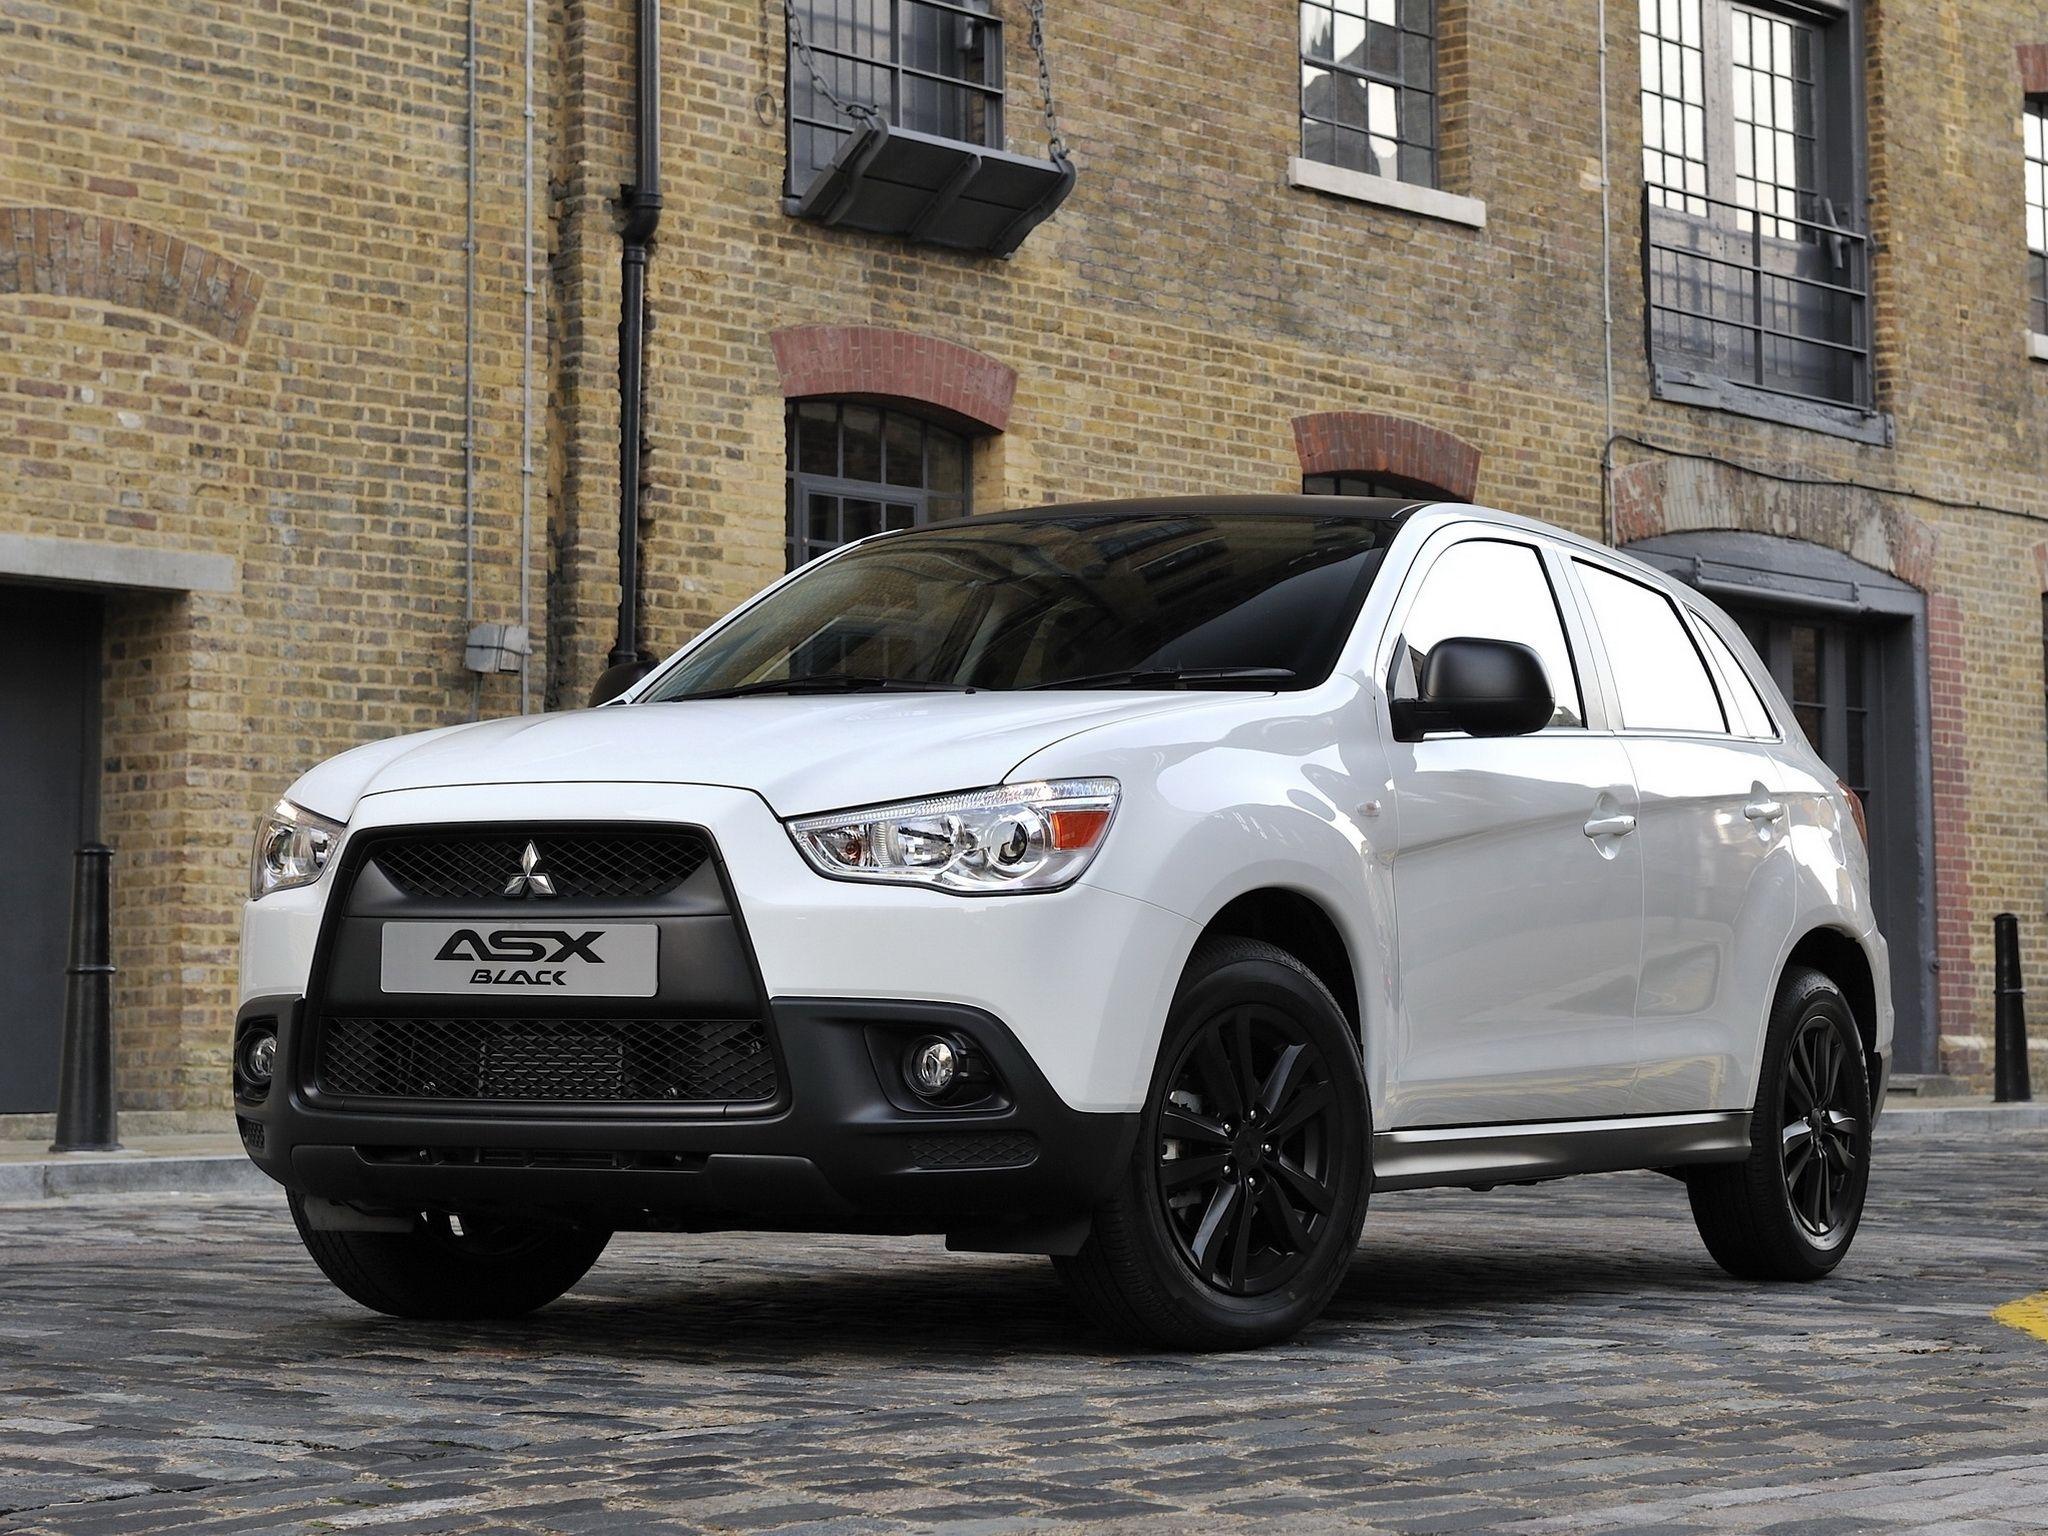 Mitsubishi ASX Black. Sold as an Outlander in USA, Indonesia